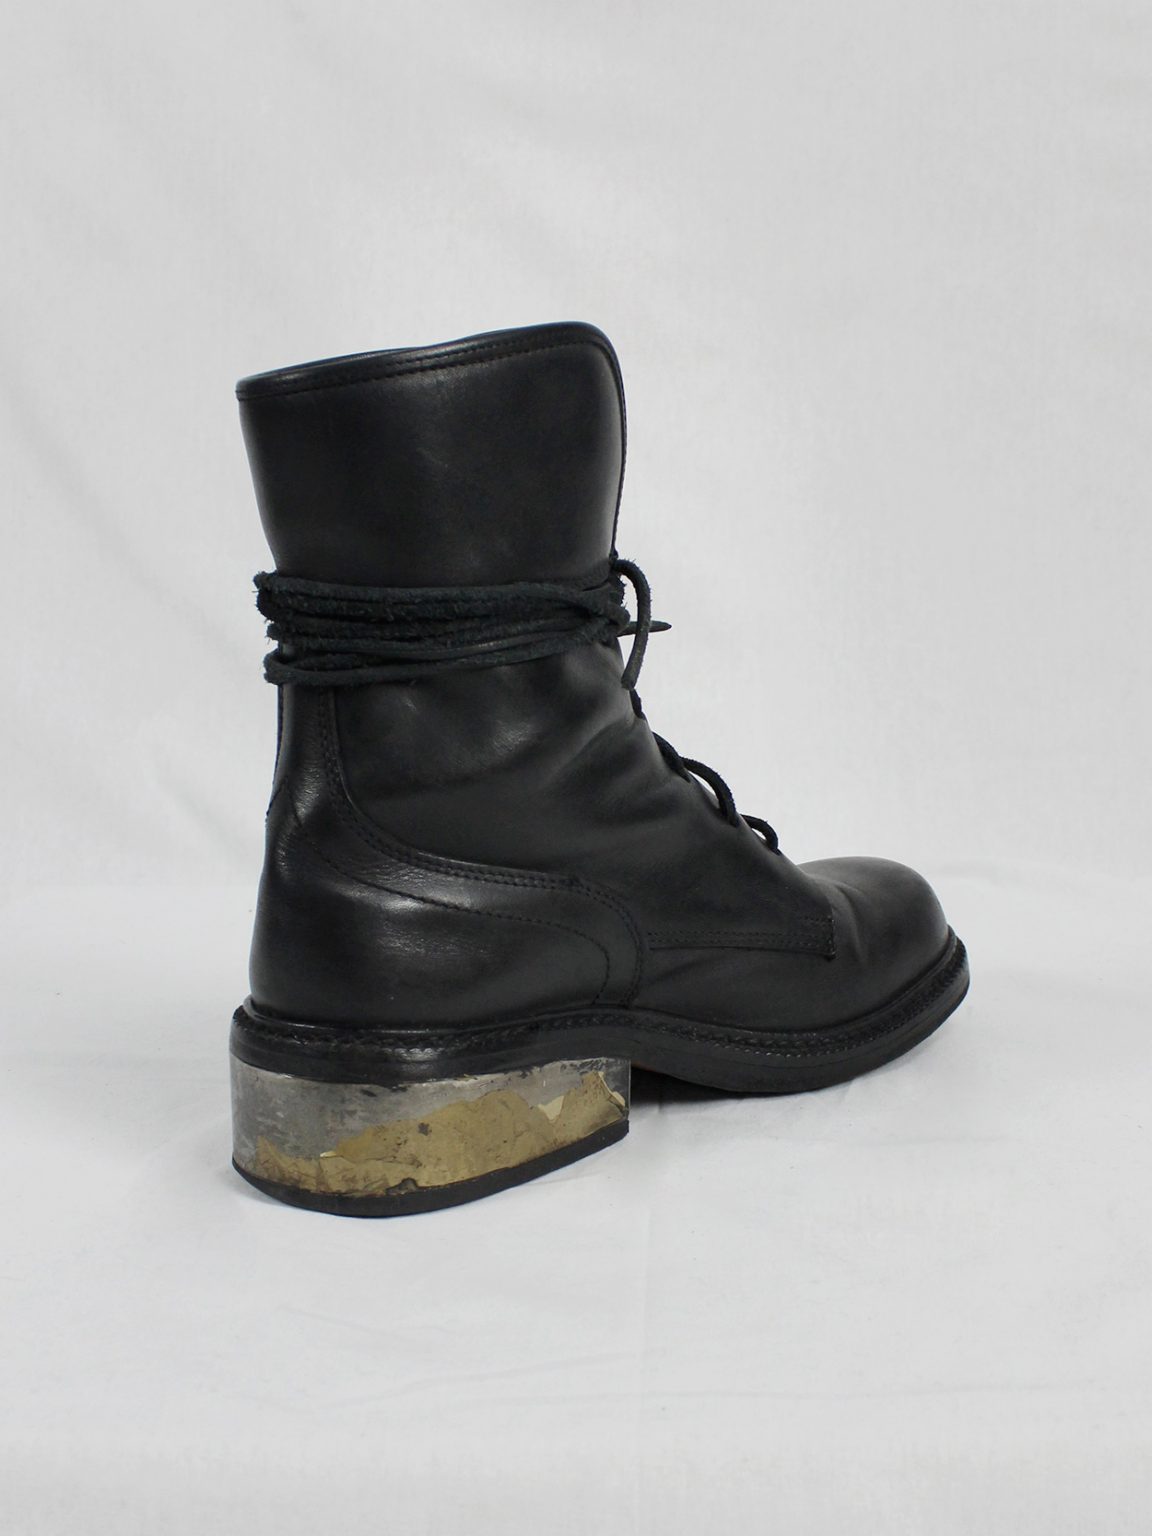 Dirk Bikkembergs black tall lace-up boots with metal heel (41) — early 2000's